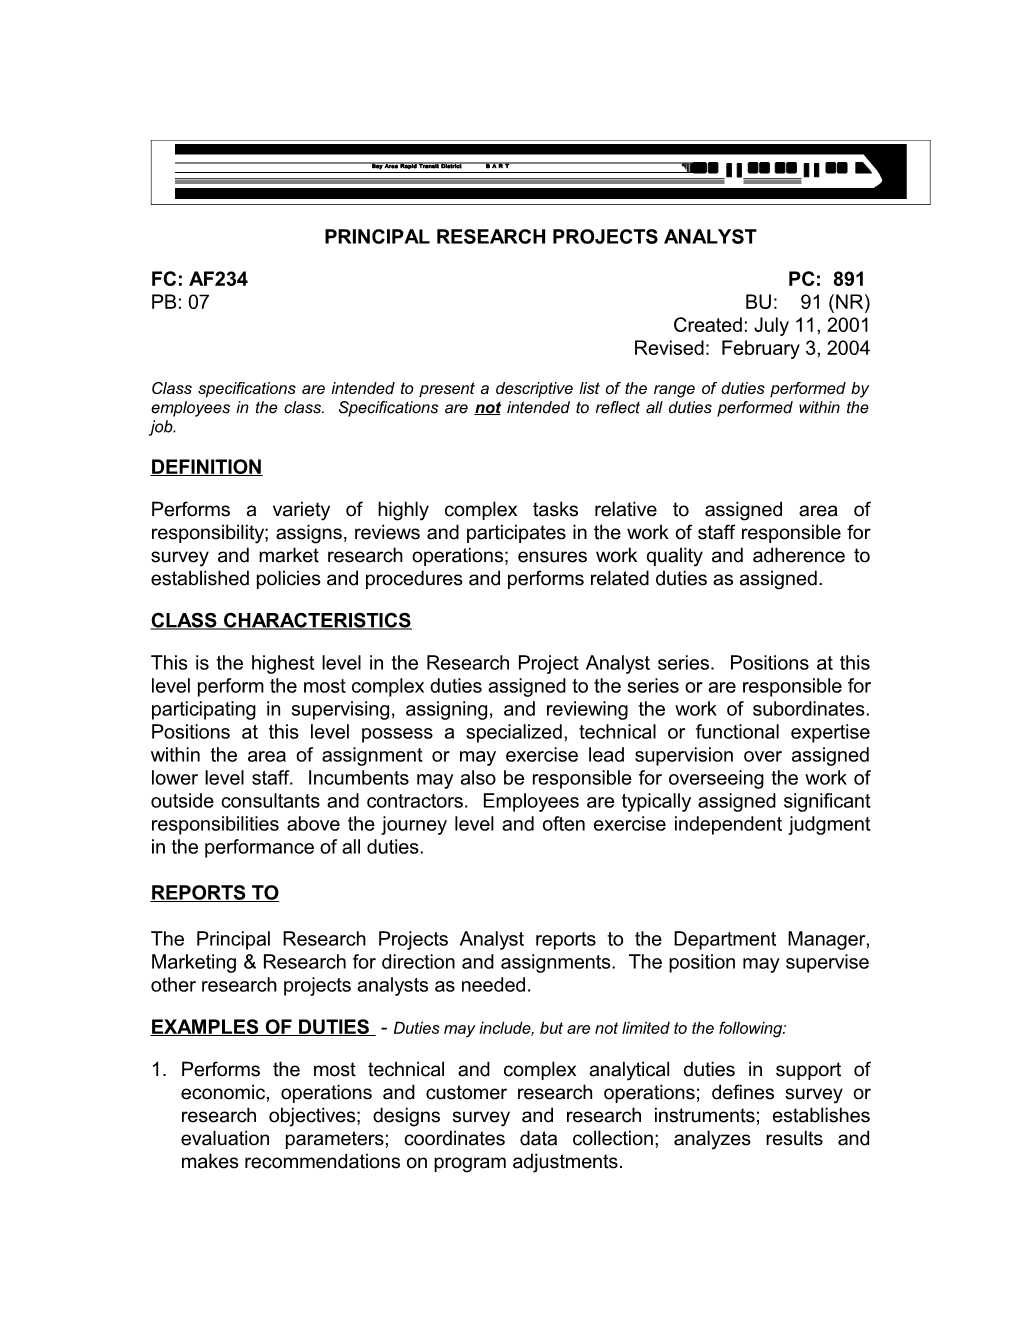 Principal Research Projects Analyst